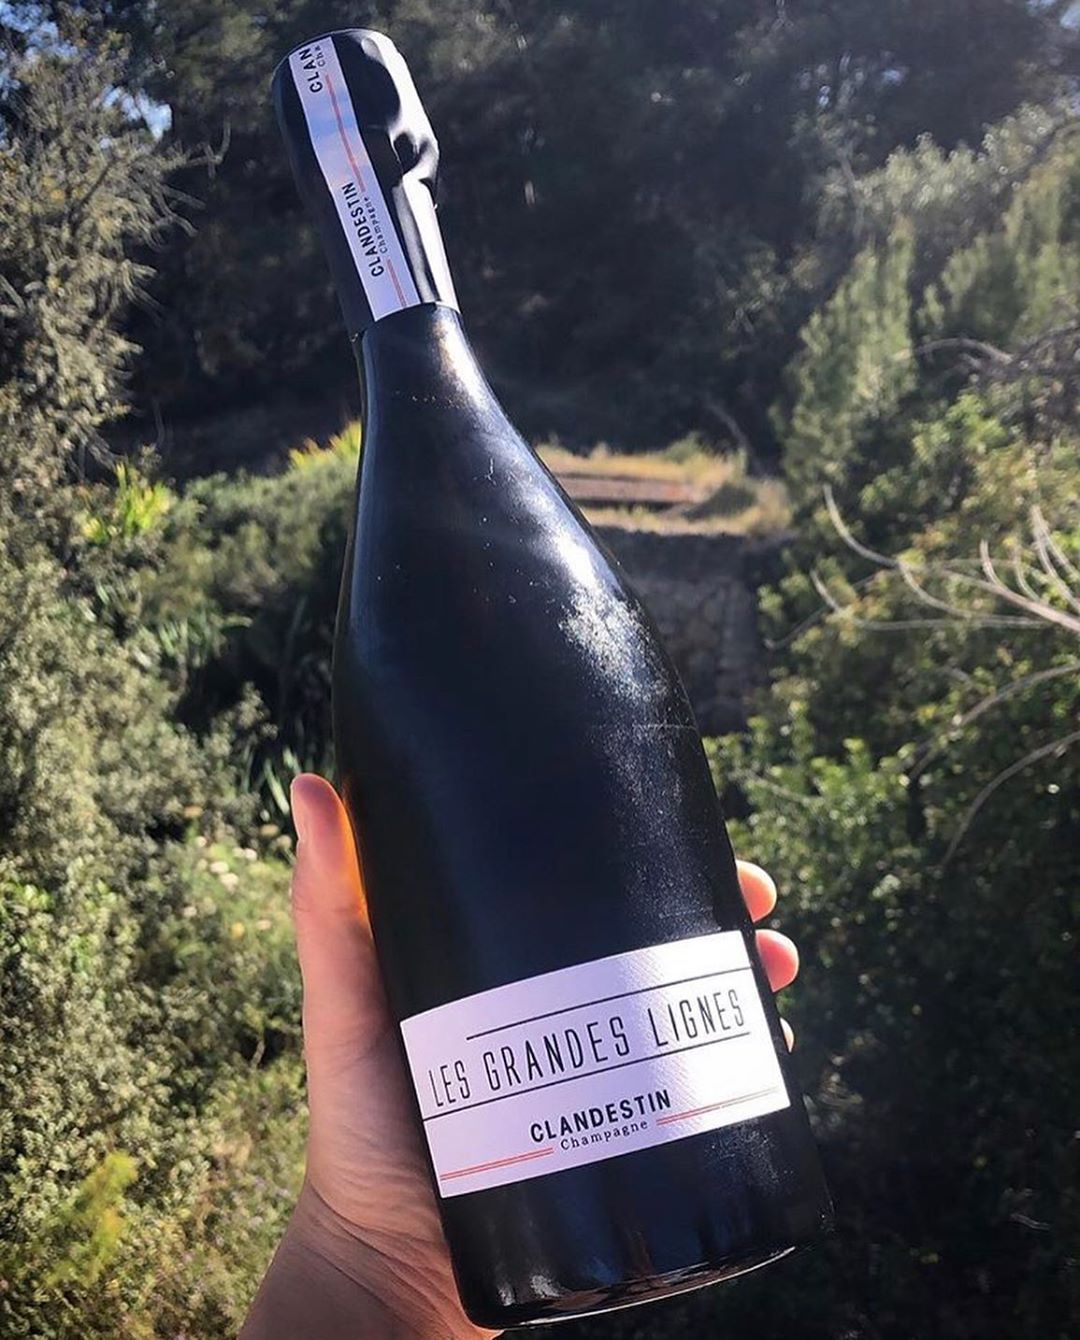 Meet Clandestin: meaning hidden or secret and it refers to the source of their champagne. Les Semblables (100% Pinot Noir) and Les Grandes Lignes (100% Chardonnay) available at Vino&Co. And oh, did we mention it’s #natural? @vinoycoibiza #vinoyco #vinoycowines #champagne #clandestin #ibiza